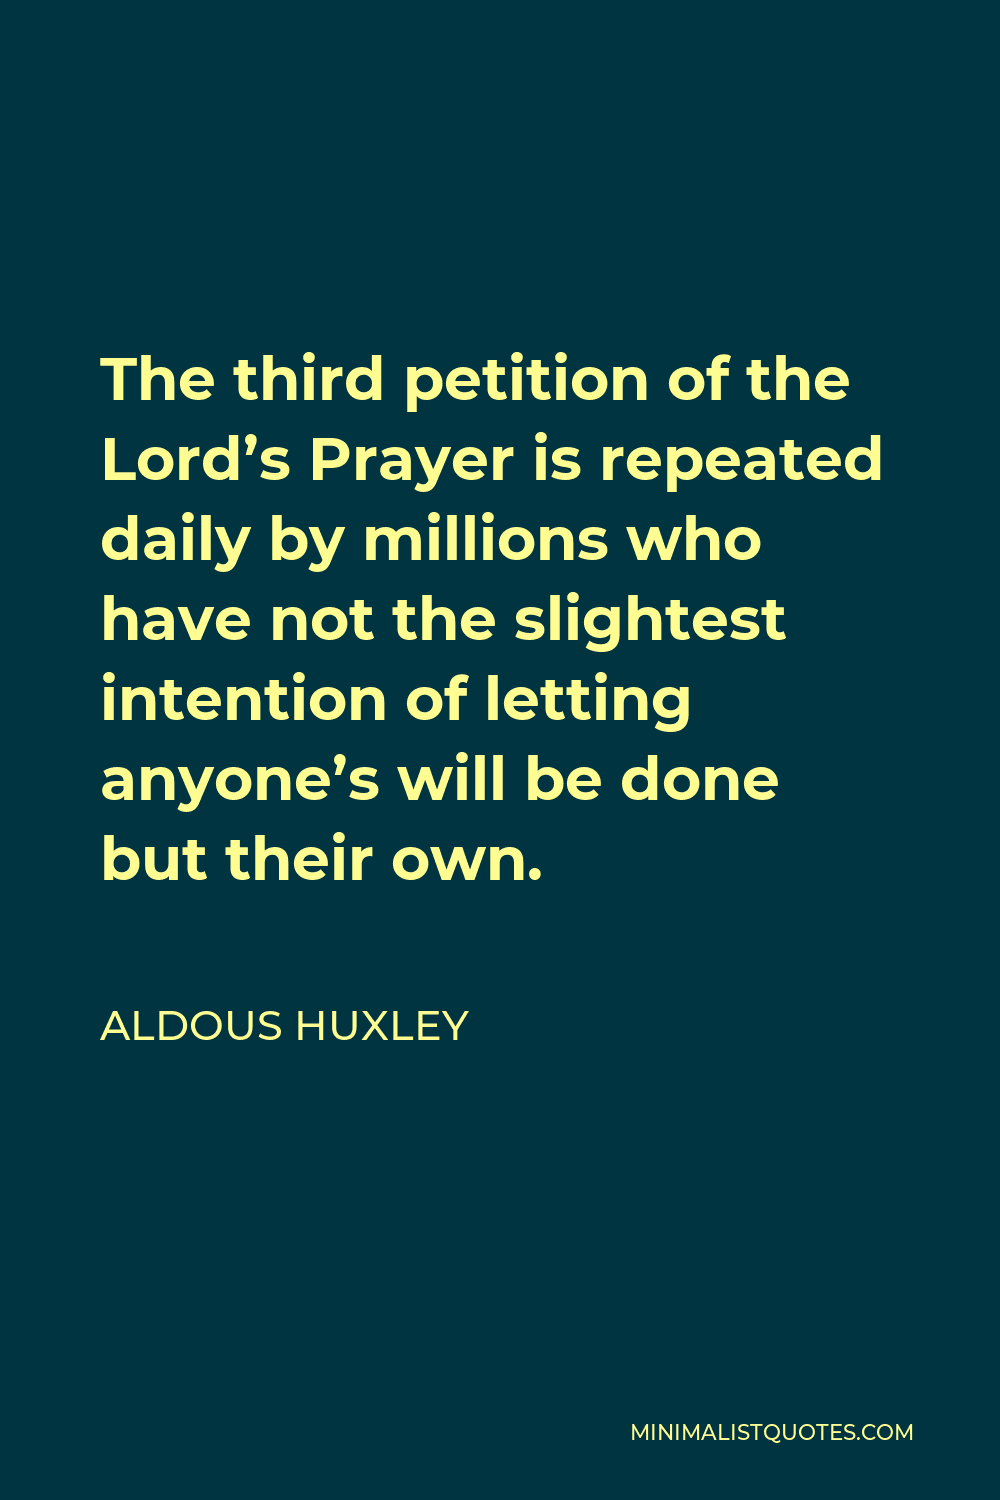 Aldous Huxley Quote - The third petition of the Lord’s Prayer is repeated daily by millions who have not the slightest intention of letting anyone’s will be done but their own.